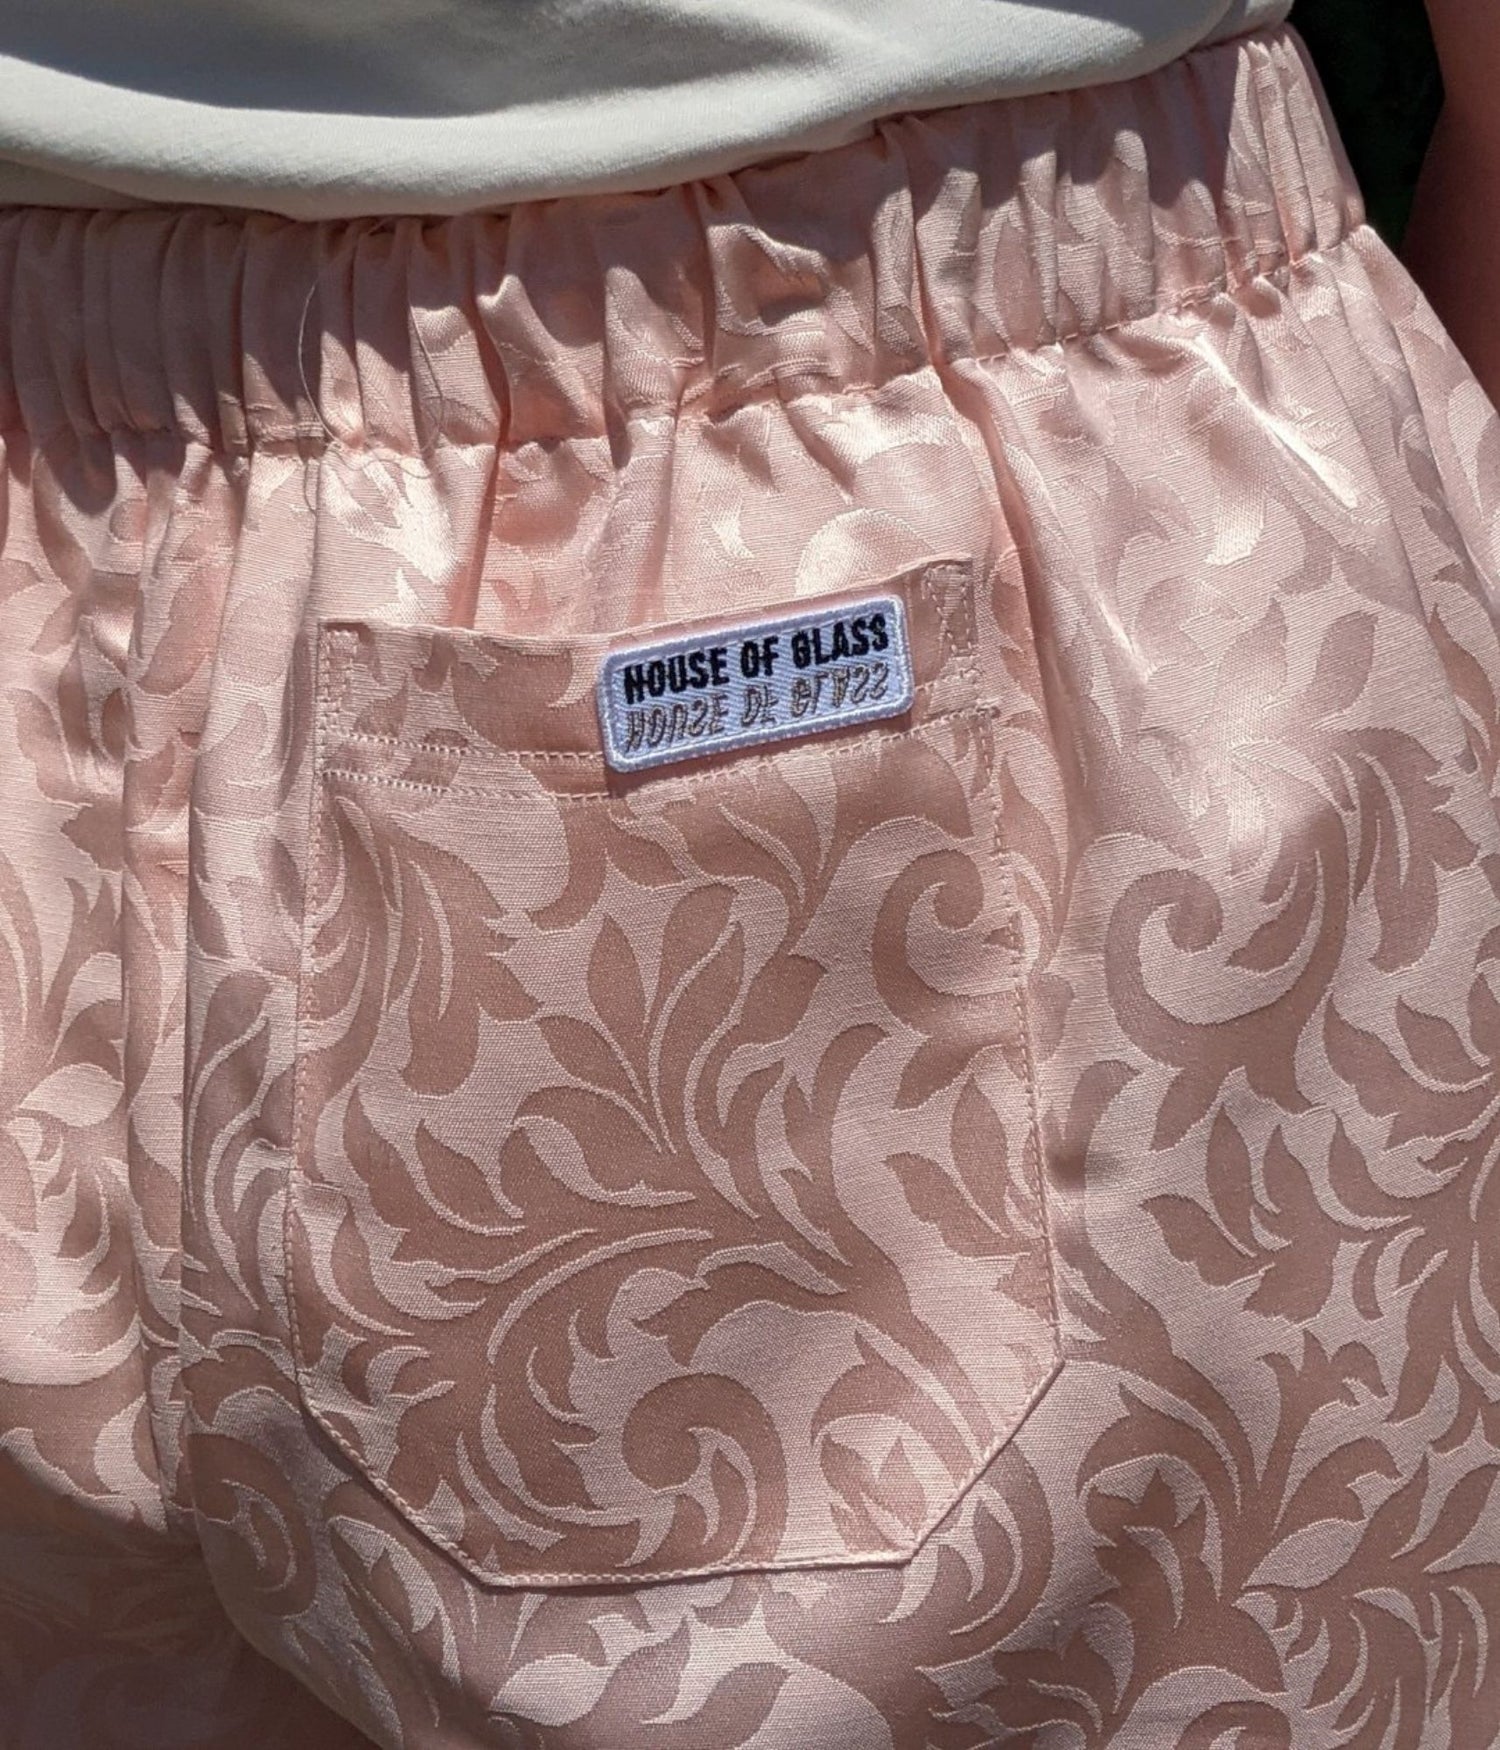 close up picture of Aramis shorts and House of Glass logo